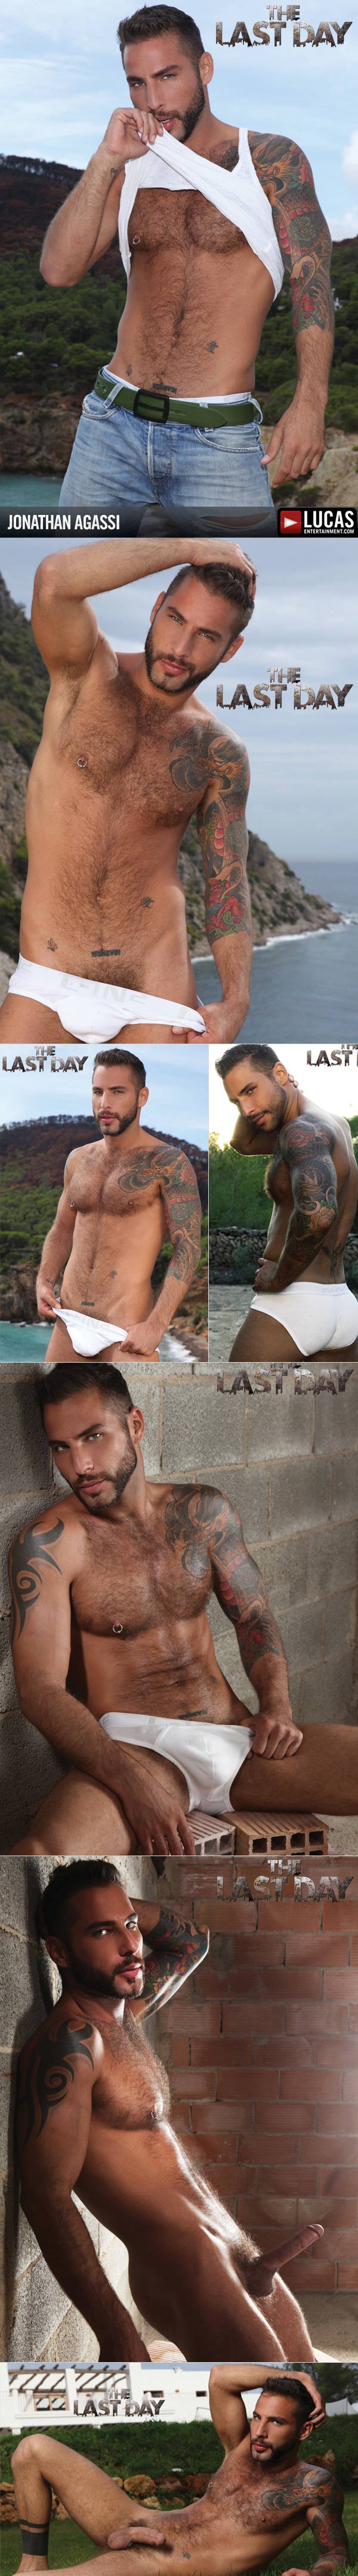 The Last Day (Jonathan Agassi, Will Helm & Kriss Aston) at LucasEntertainment.com